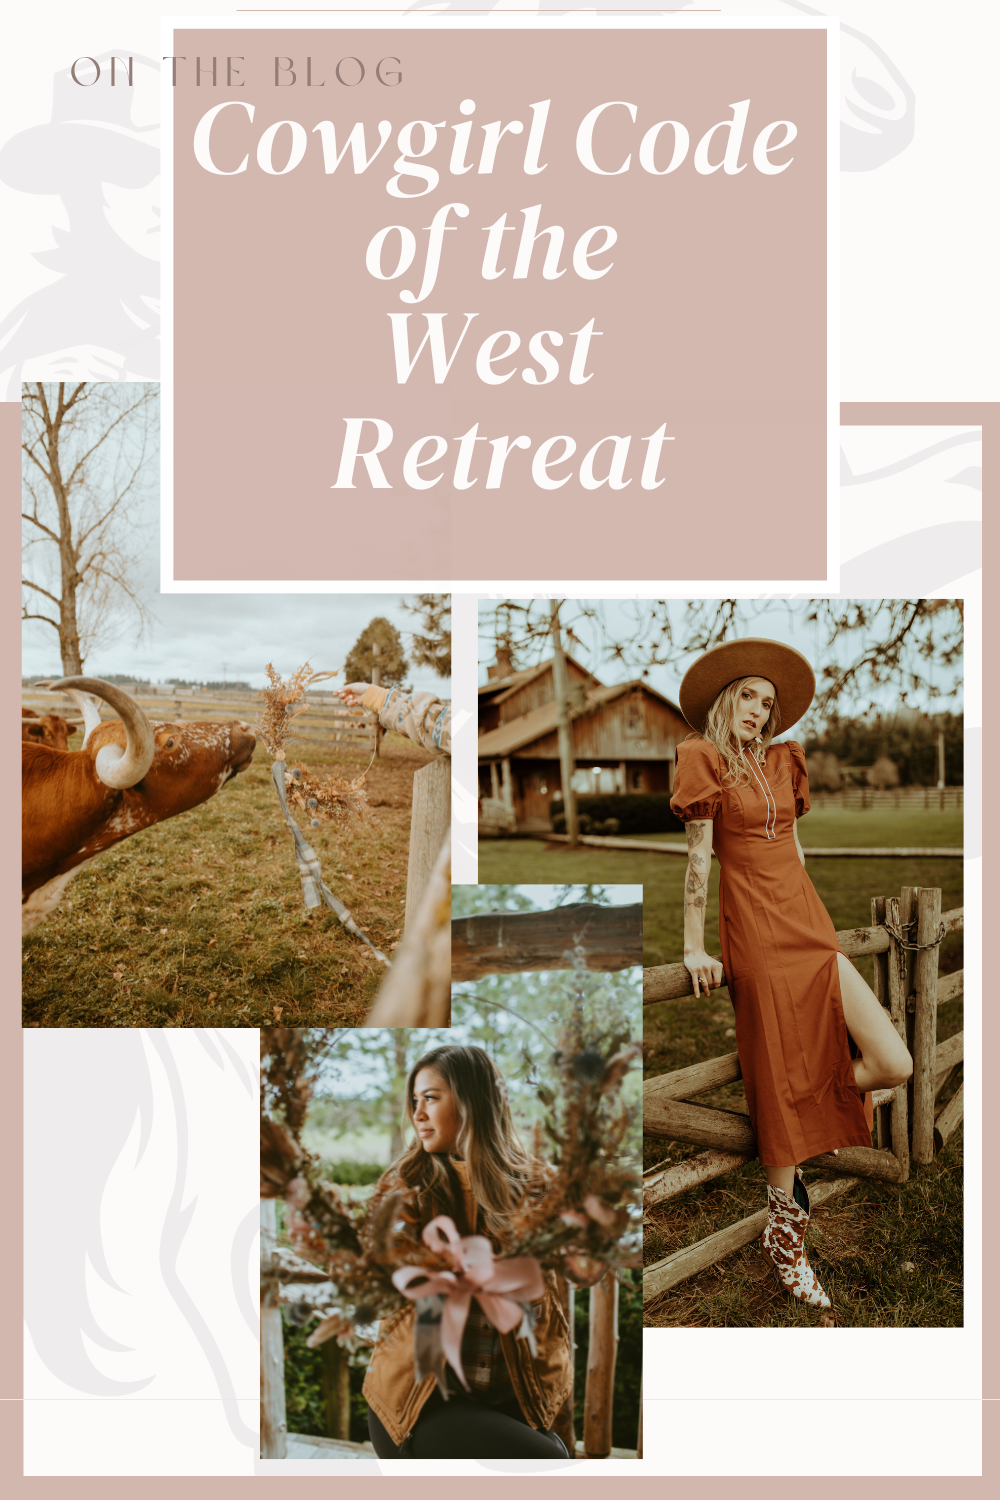 Recap of the Cowgirl Code of the West Retreat